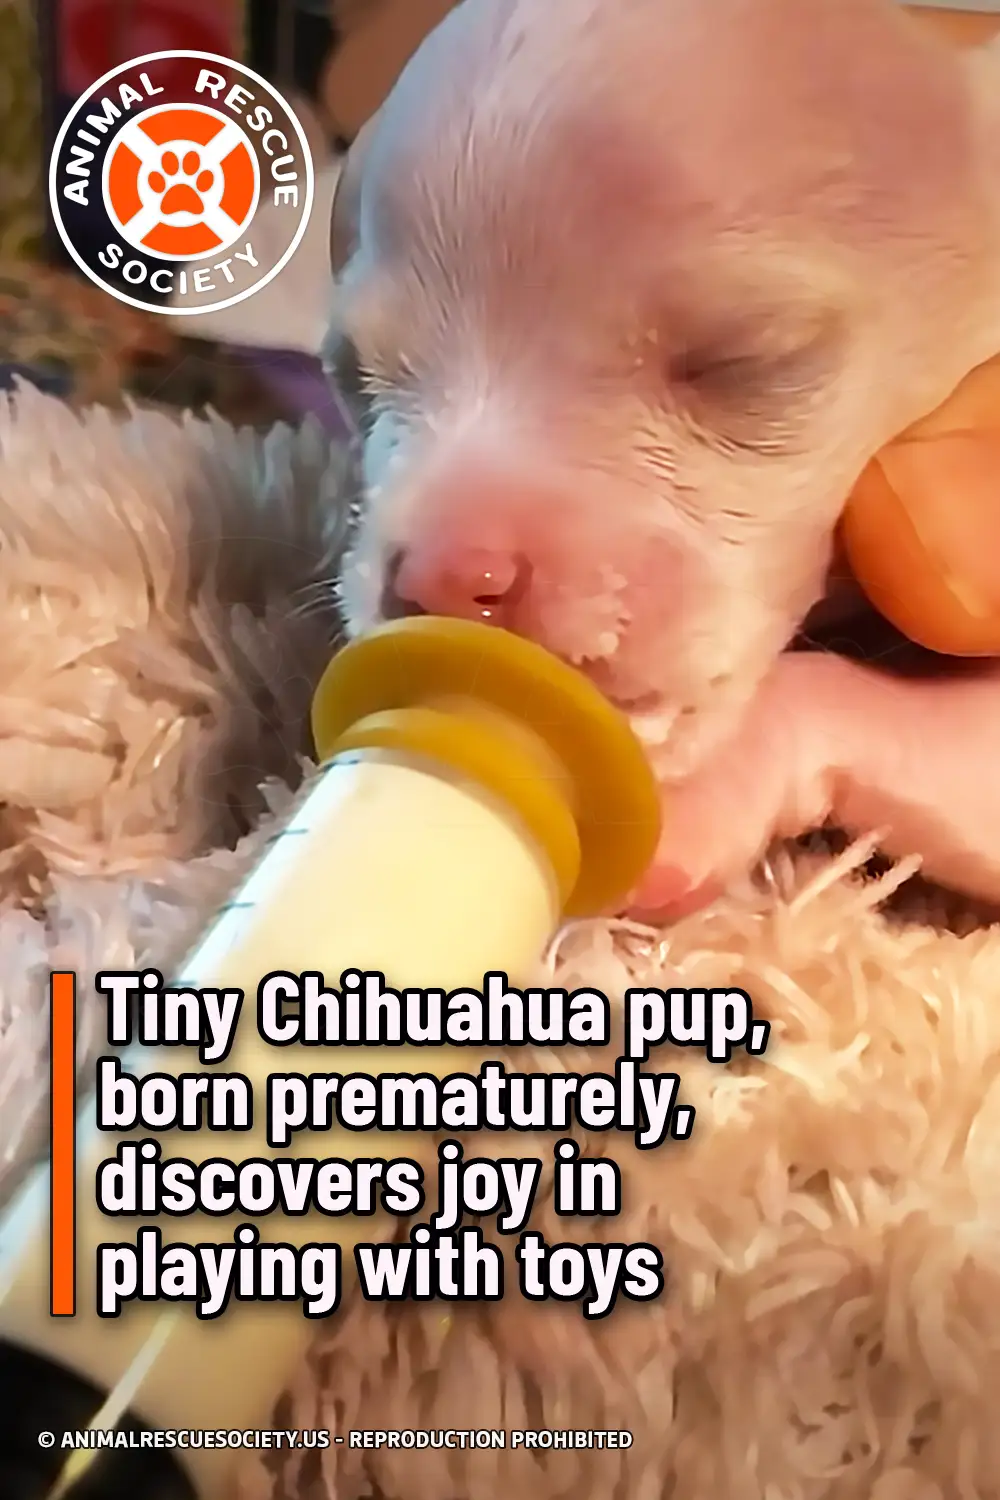 Tiny Chihuahua pup, born prematurely, discovers joy in playing with toys